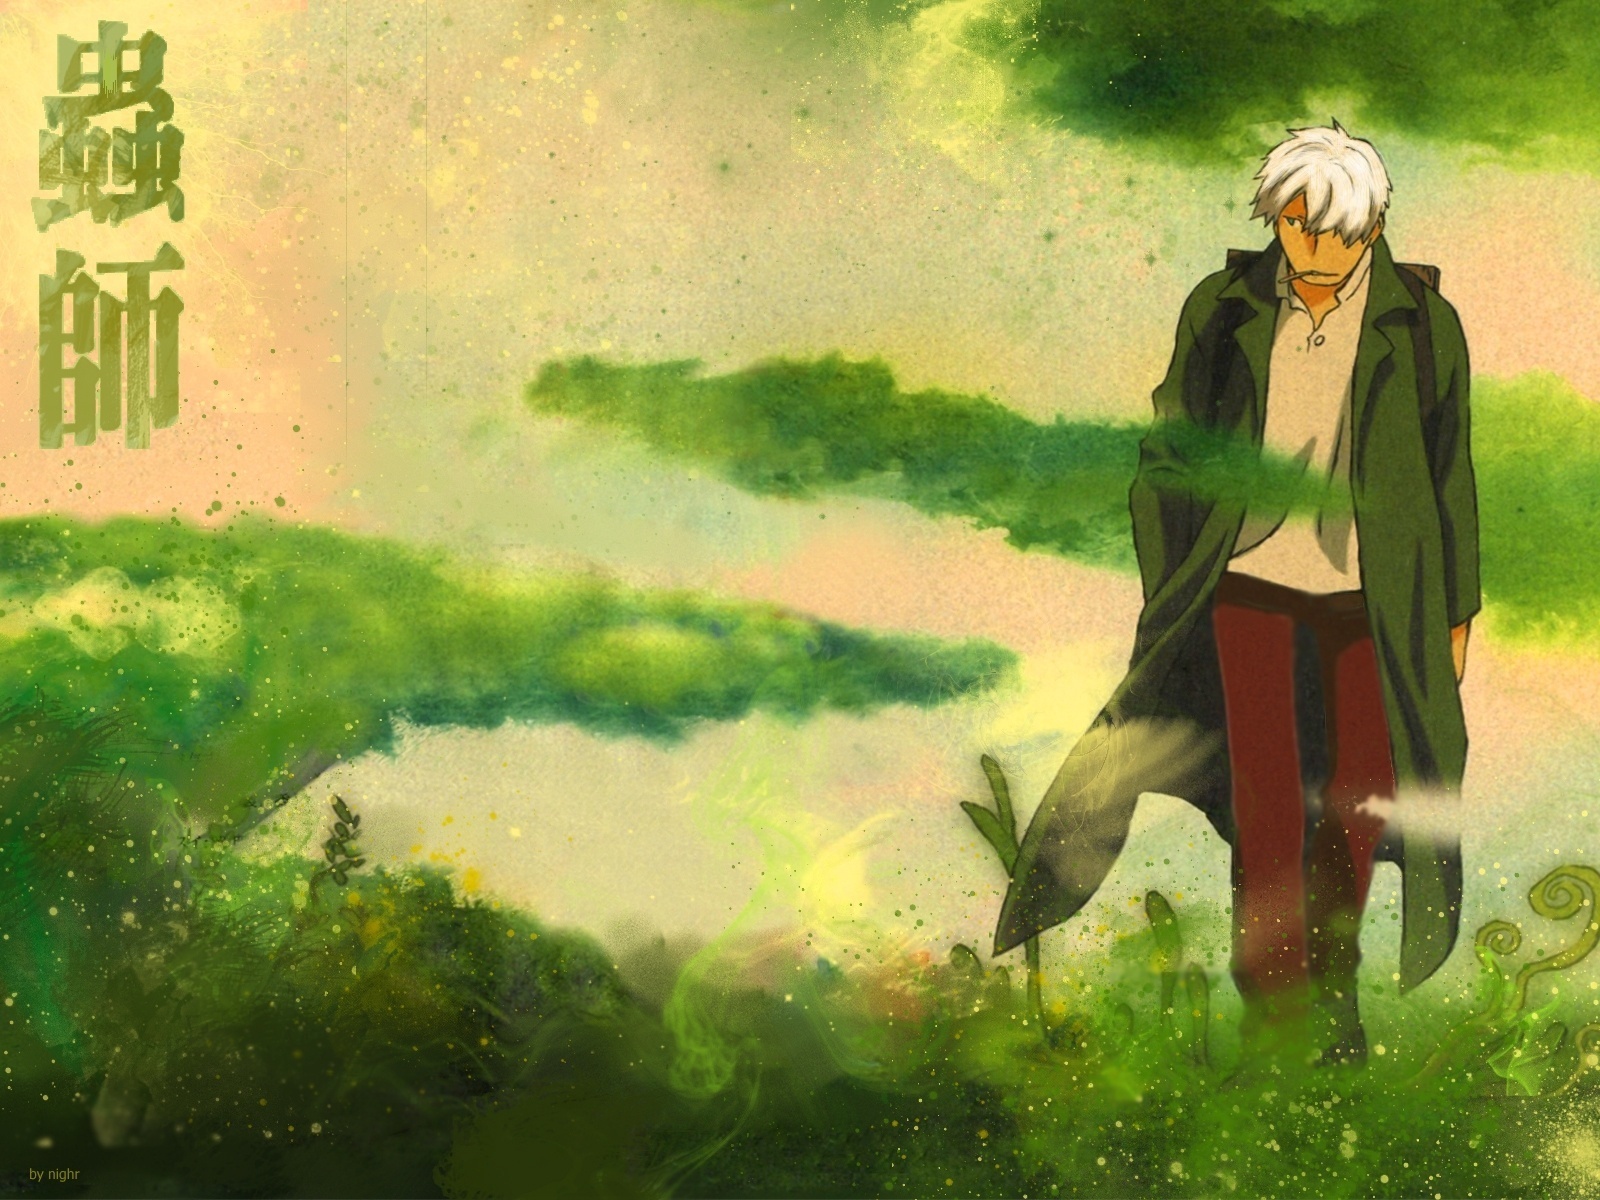 Mushishi Backgrounds, Compatible - PC, Mobile, Gadgets| 1600x1200 px